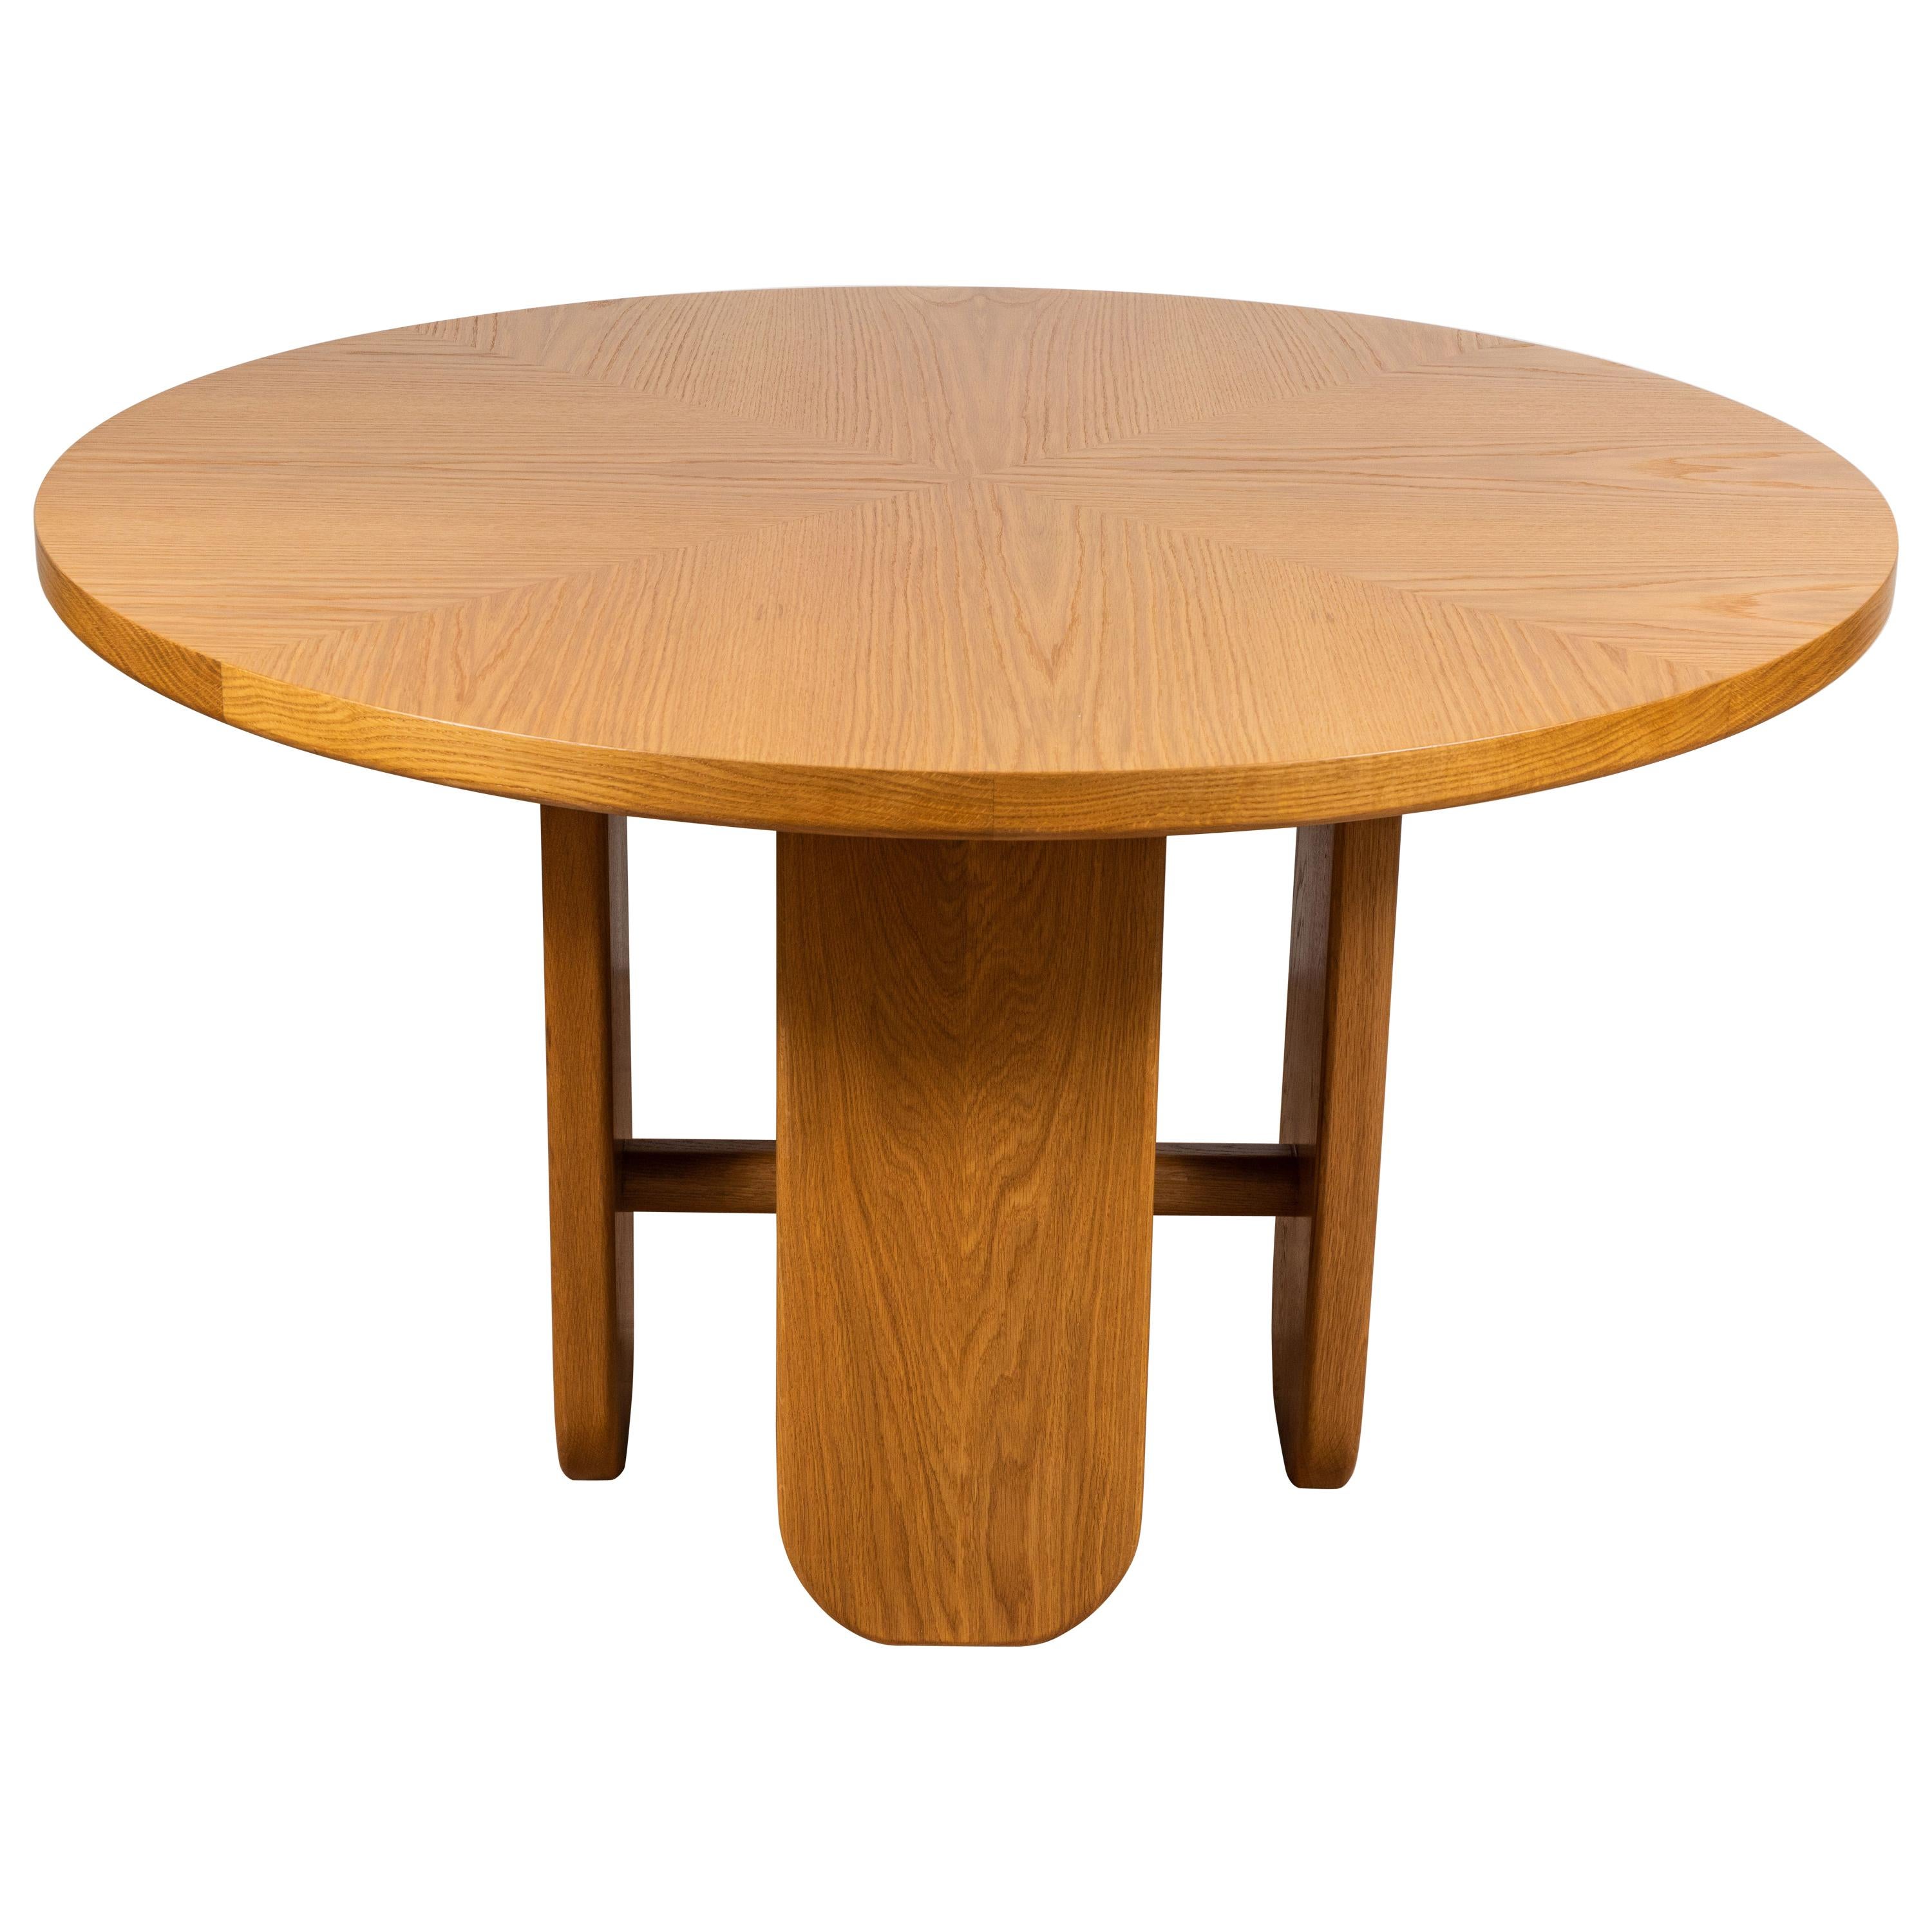 Rainier Dining Table by Brian Paquette for Lawson-Fenning